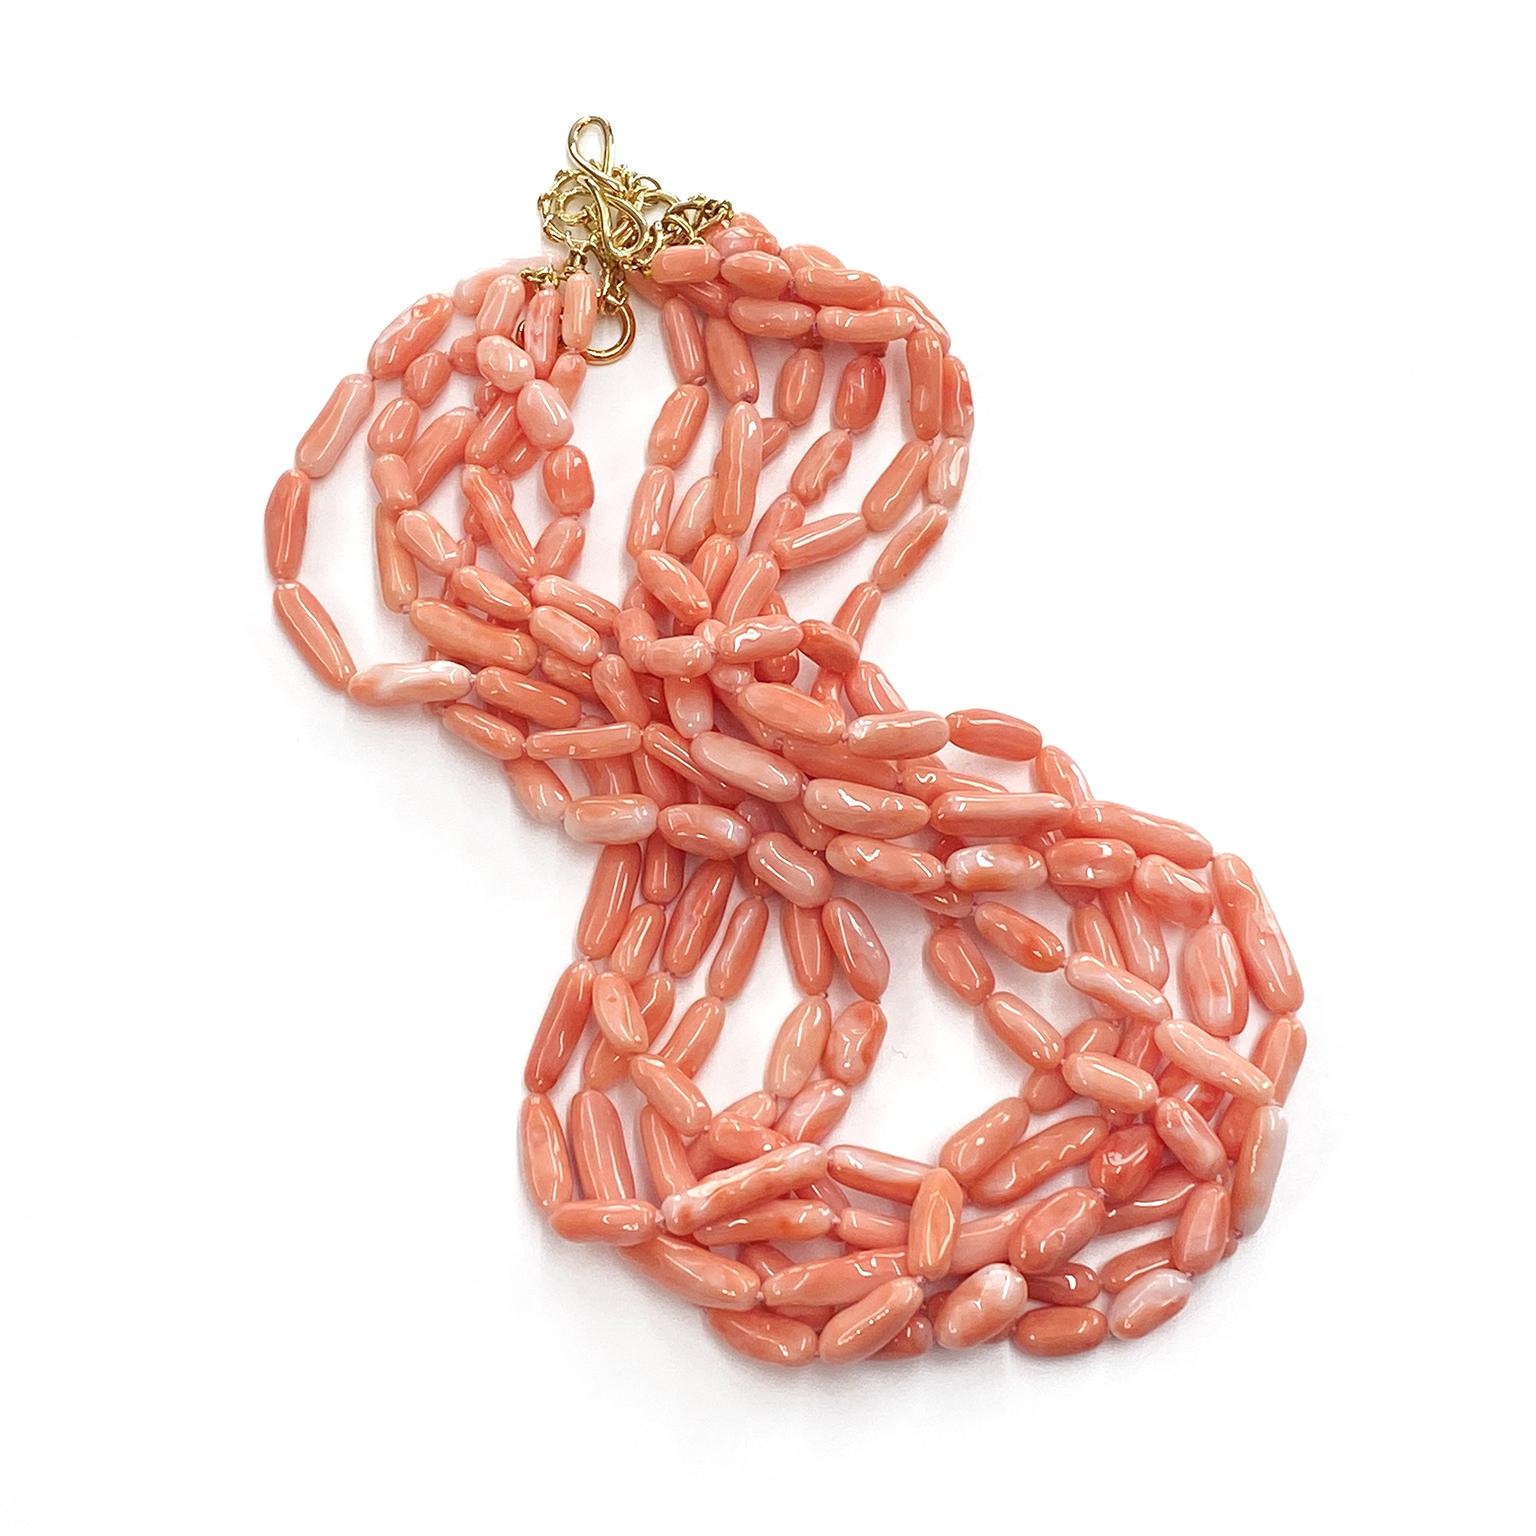 The delicate beauty of angel skin is appraised in this multi strand necklace. The coral is carved into irregular shaped nuggets and placed on a total of six strands. This allows the undertones of an array of pink hues of the precious gem to be